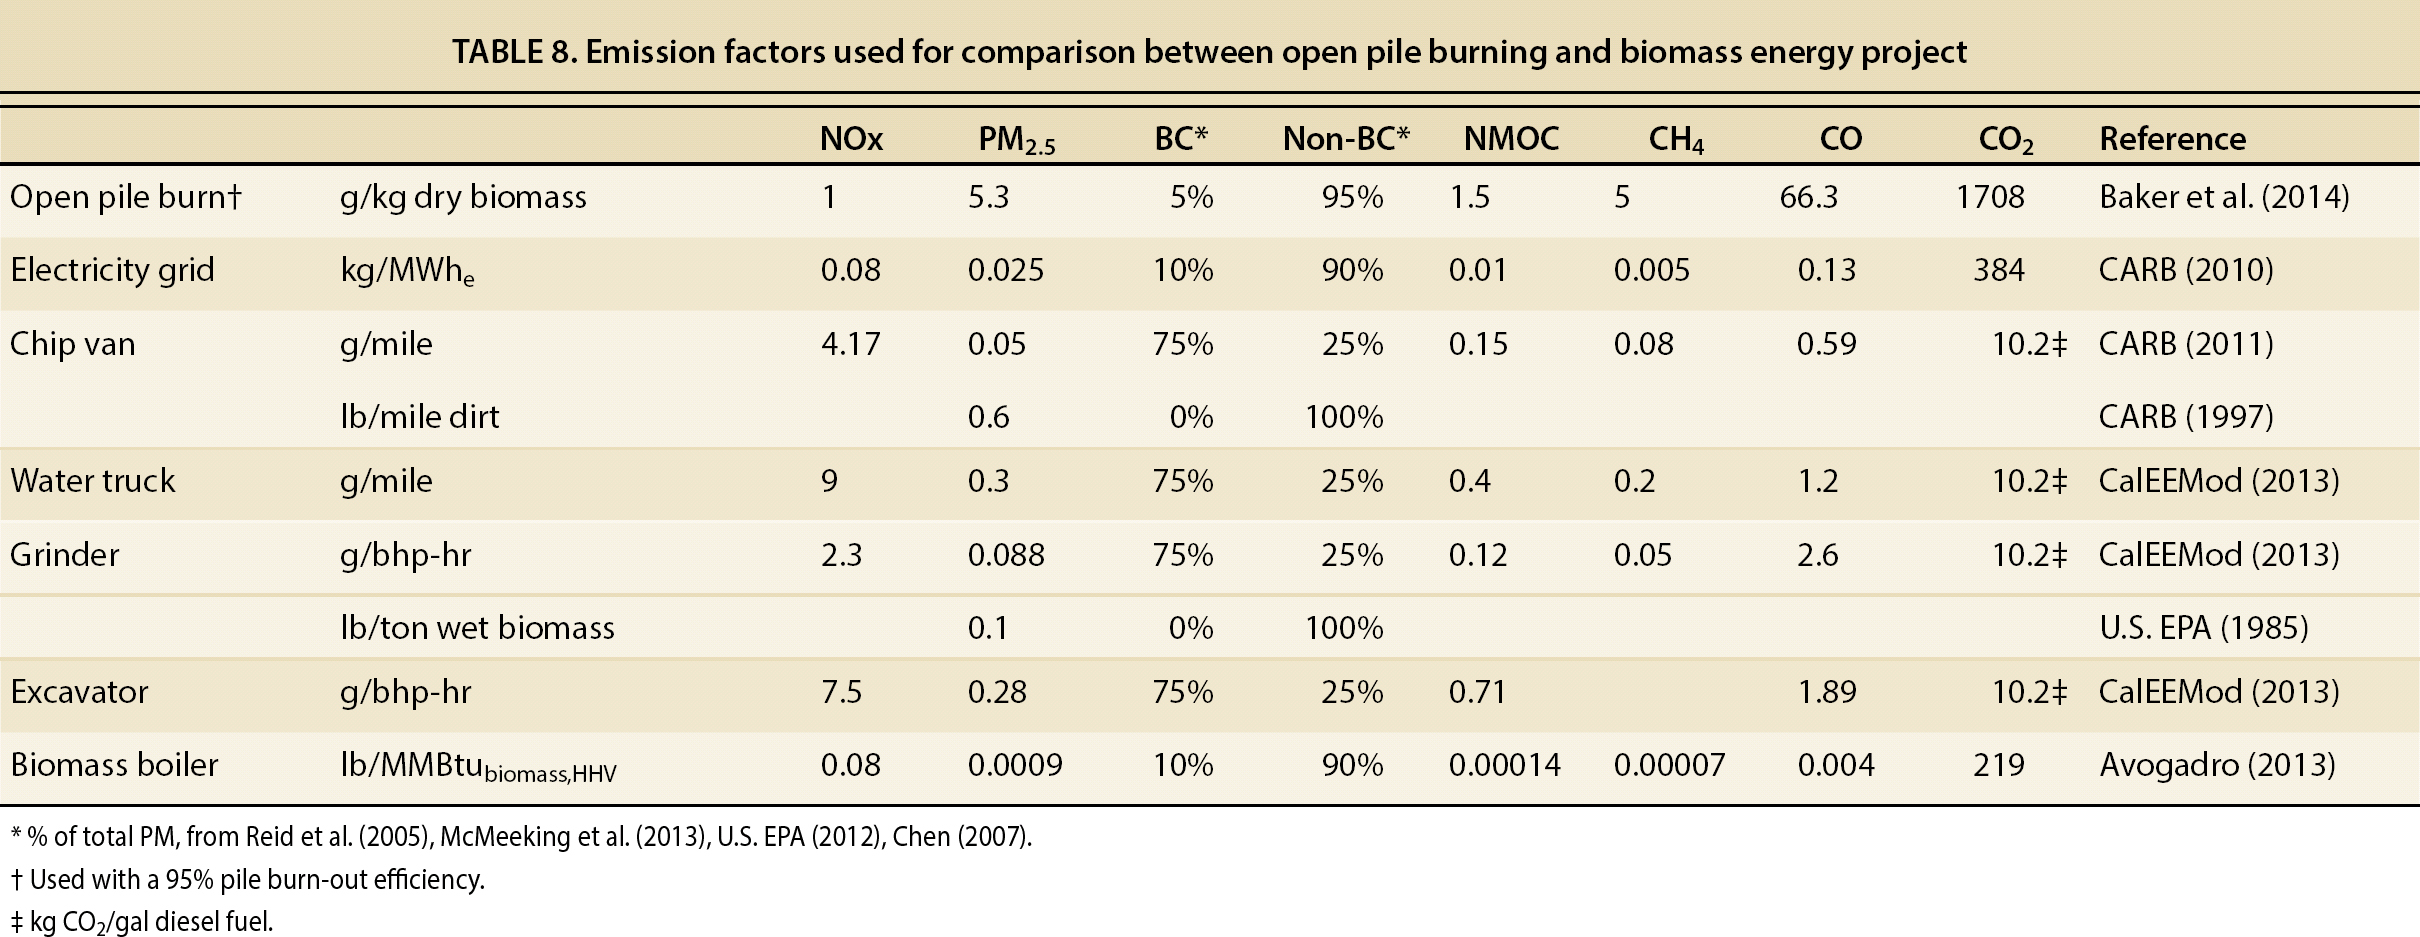 Emission factors used for comparison between open pile burning and biomass energy project